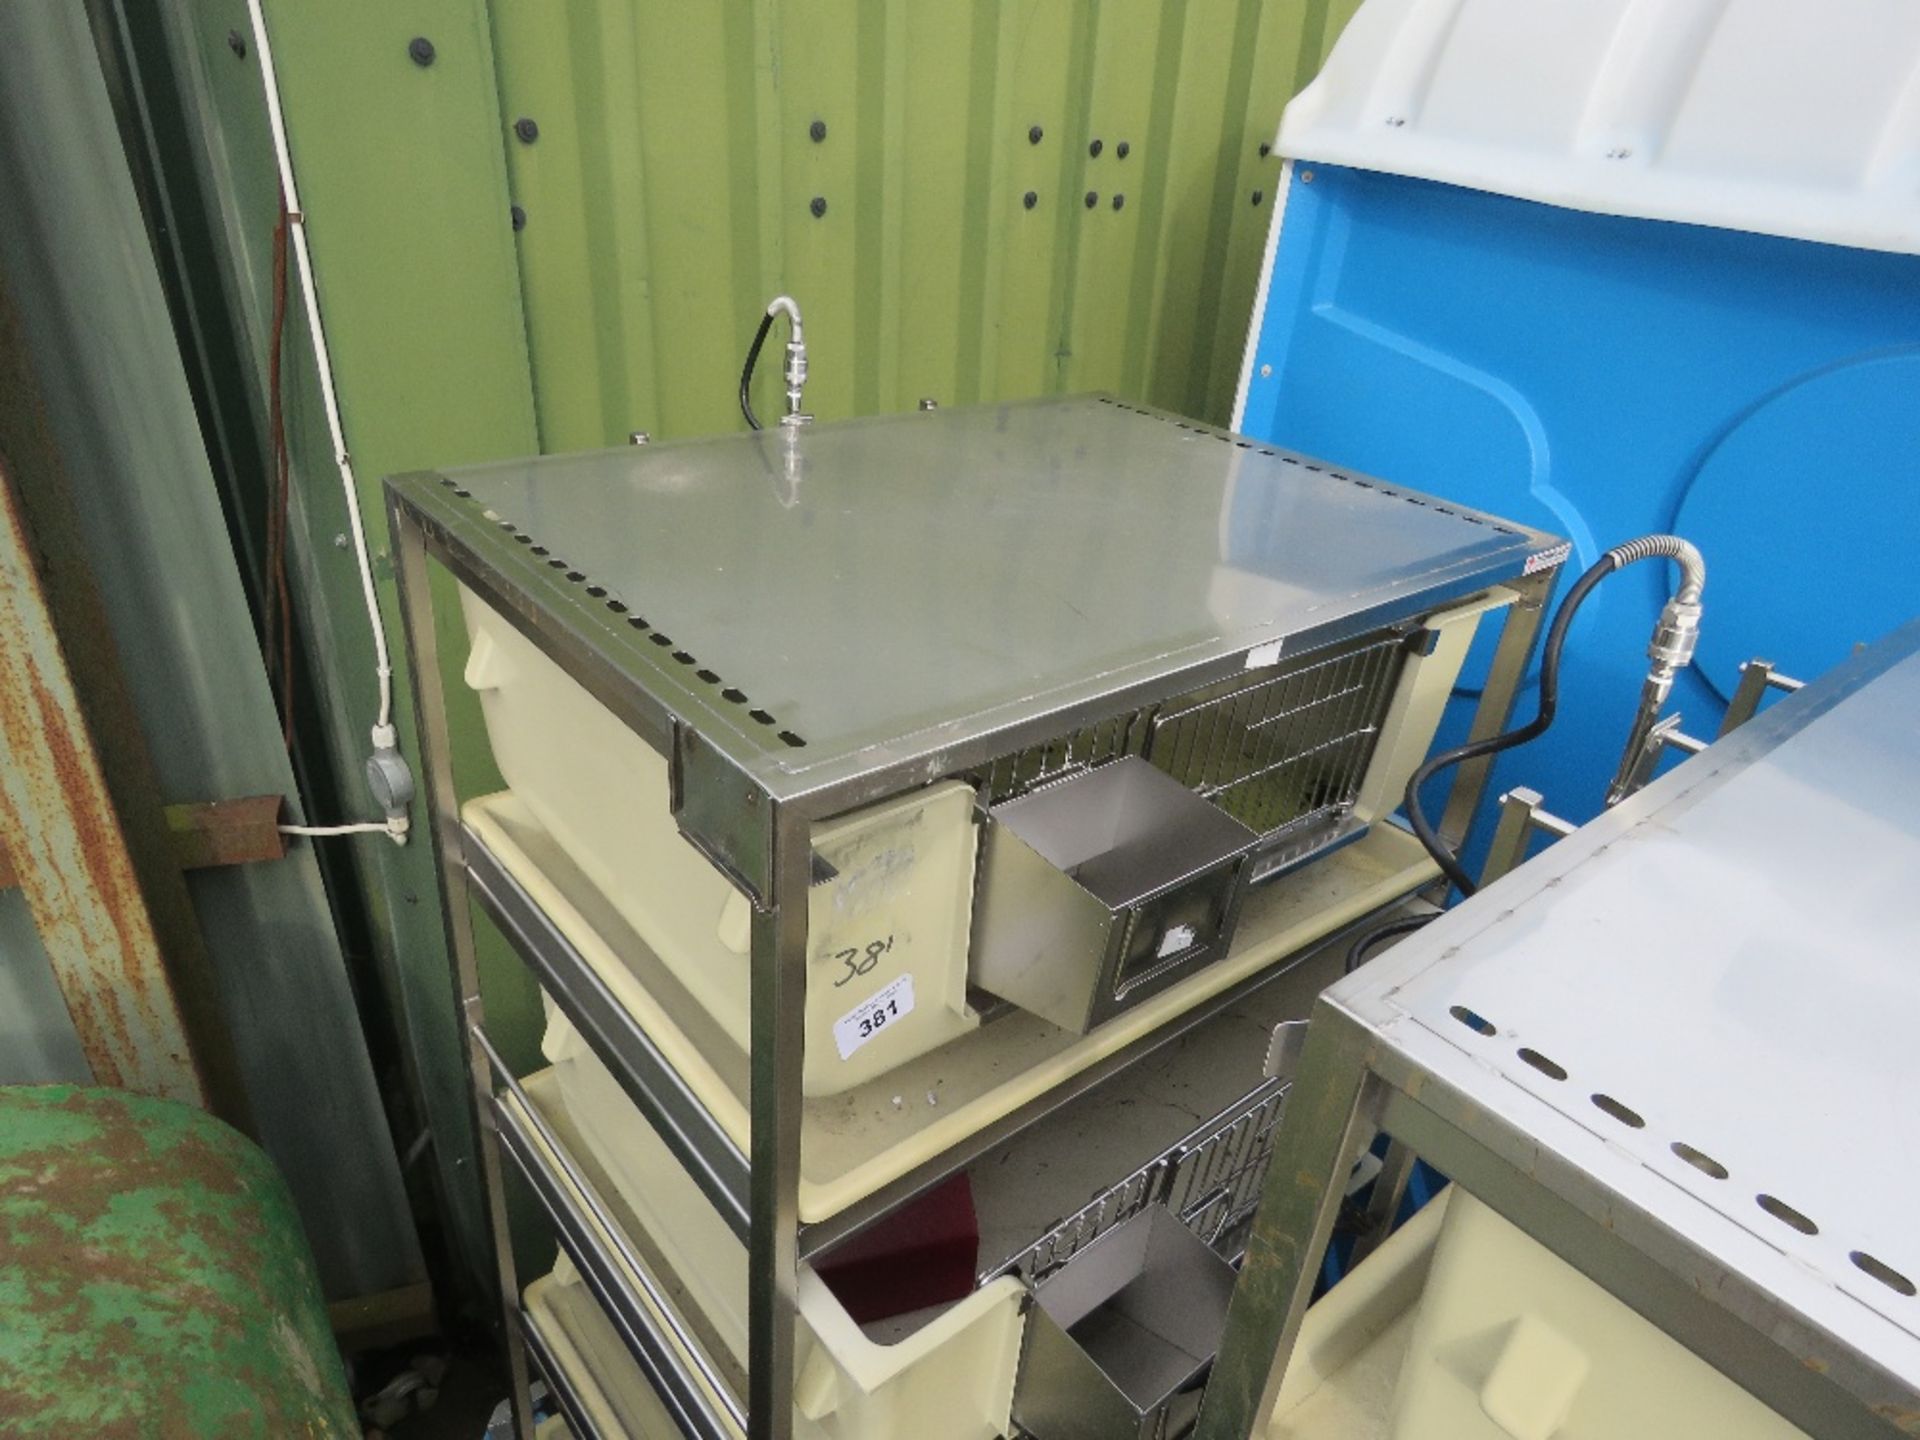 TECNIPLAST WHEELED STAINLESS STEEL TROLLEY FRAME CONTAINING 4 X VETINARY ANIMAL CAGES, LITTLE SIGNS - Image 3 of 3